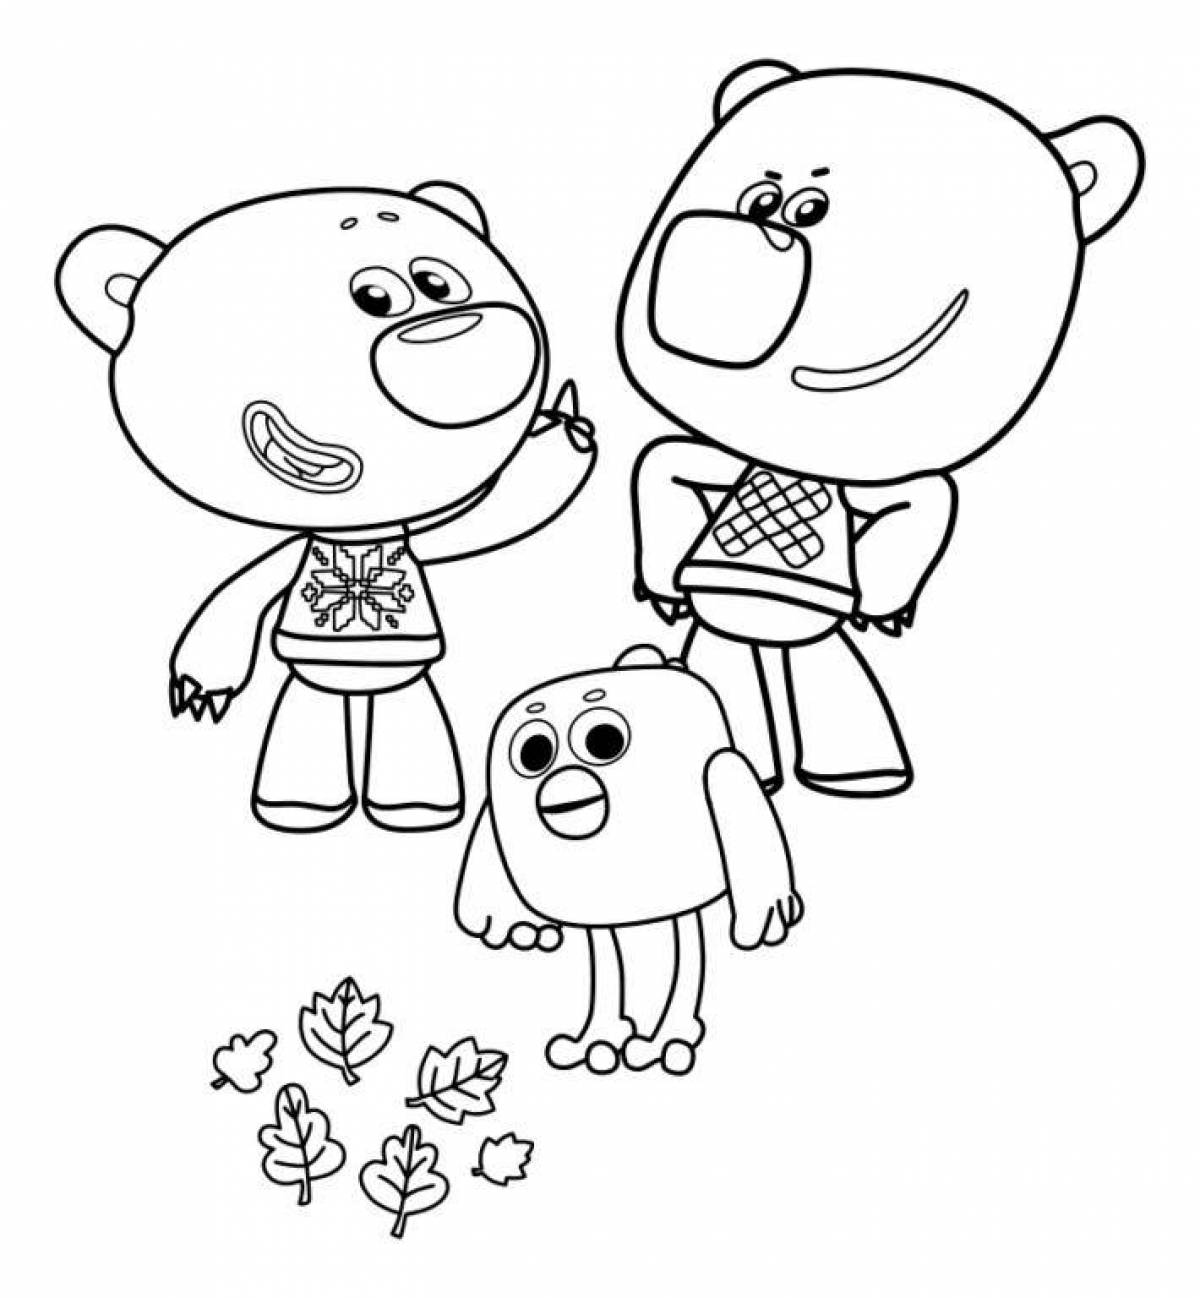 Colorful coloring bears for kids